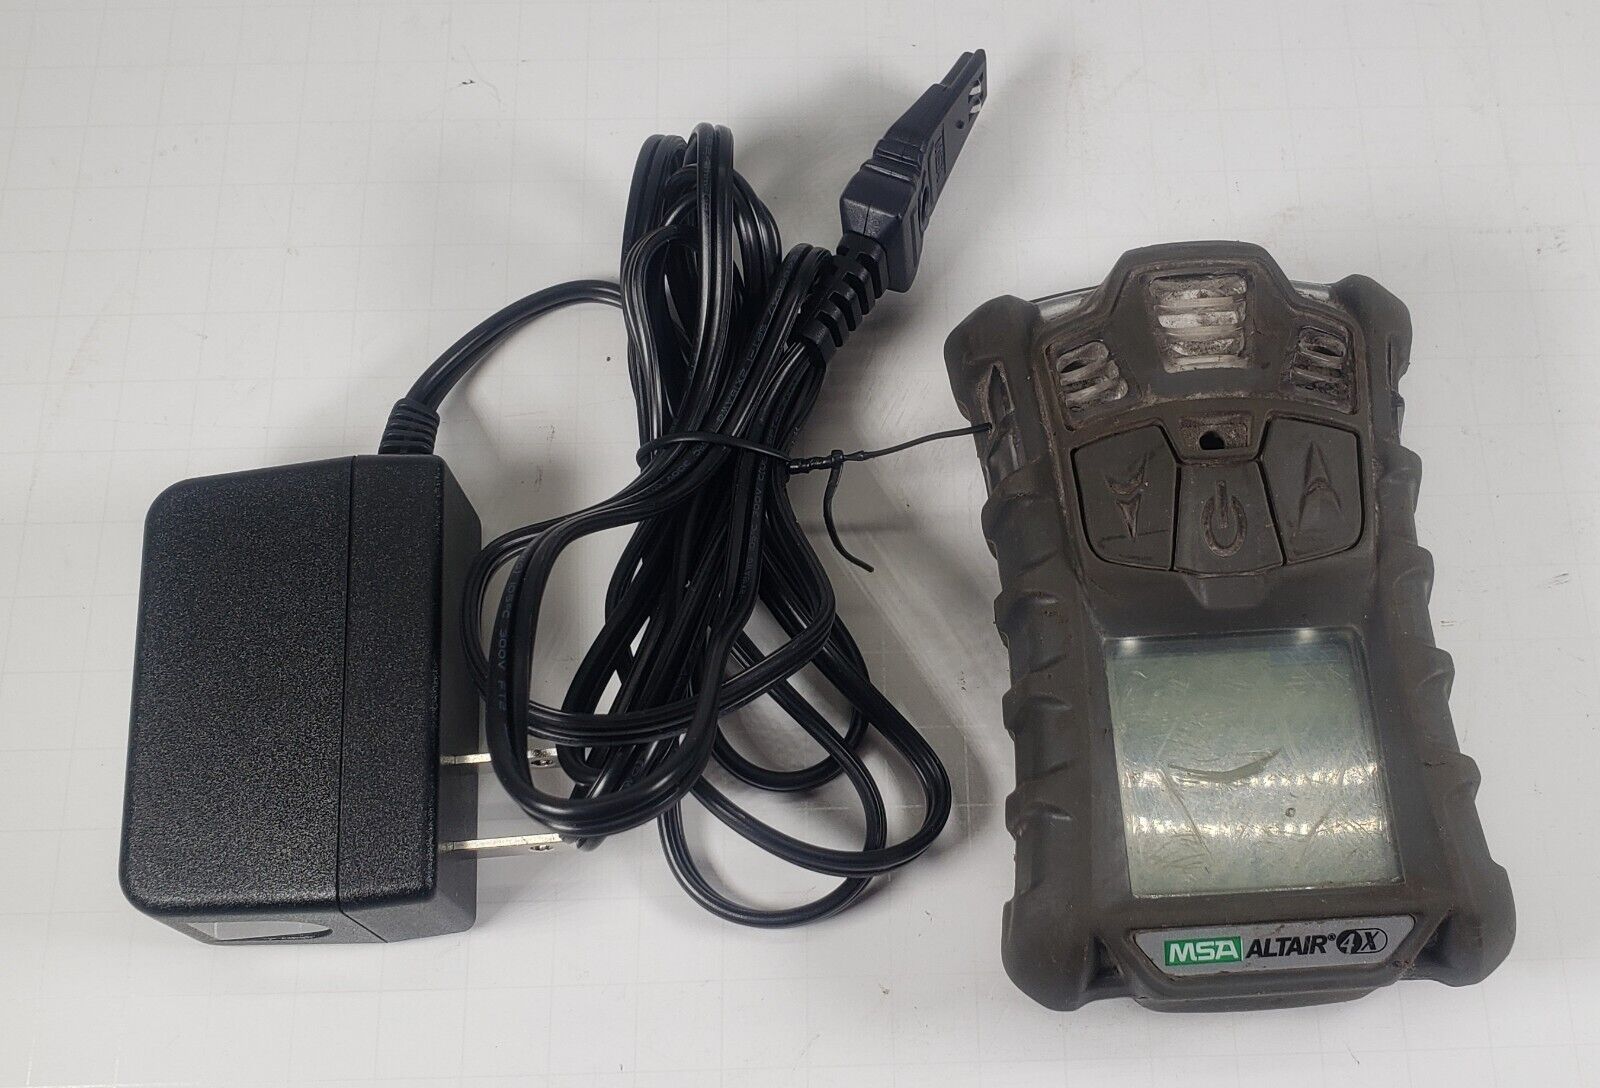 MSA Altair 4X Multigas Detector with Charging Cord Scratched Screen Last One